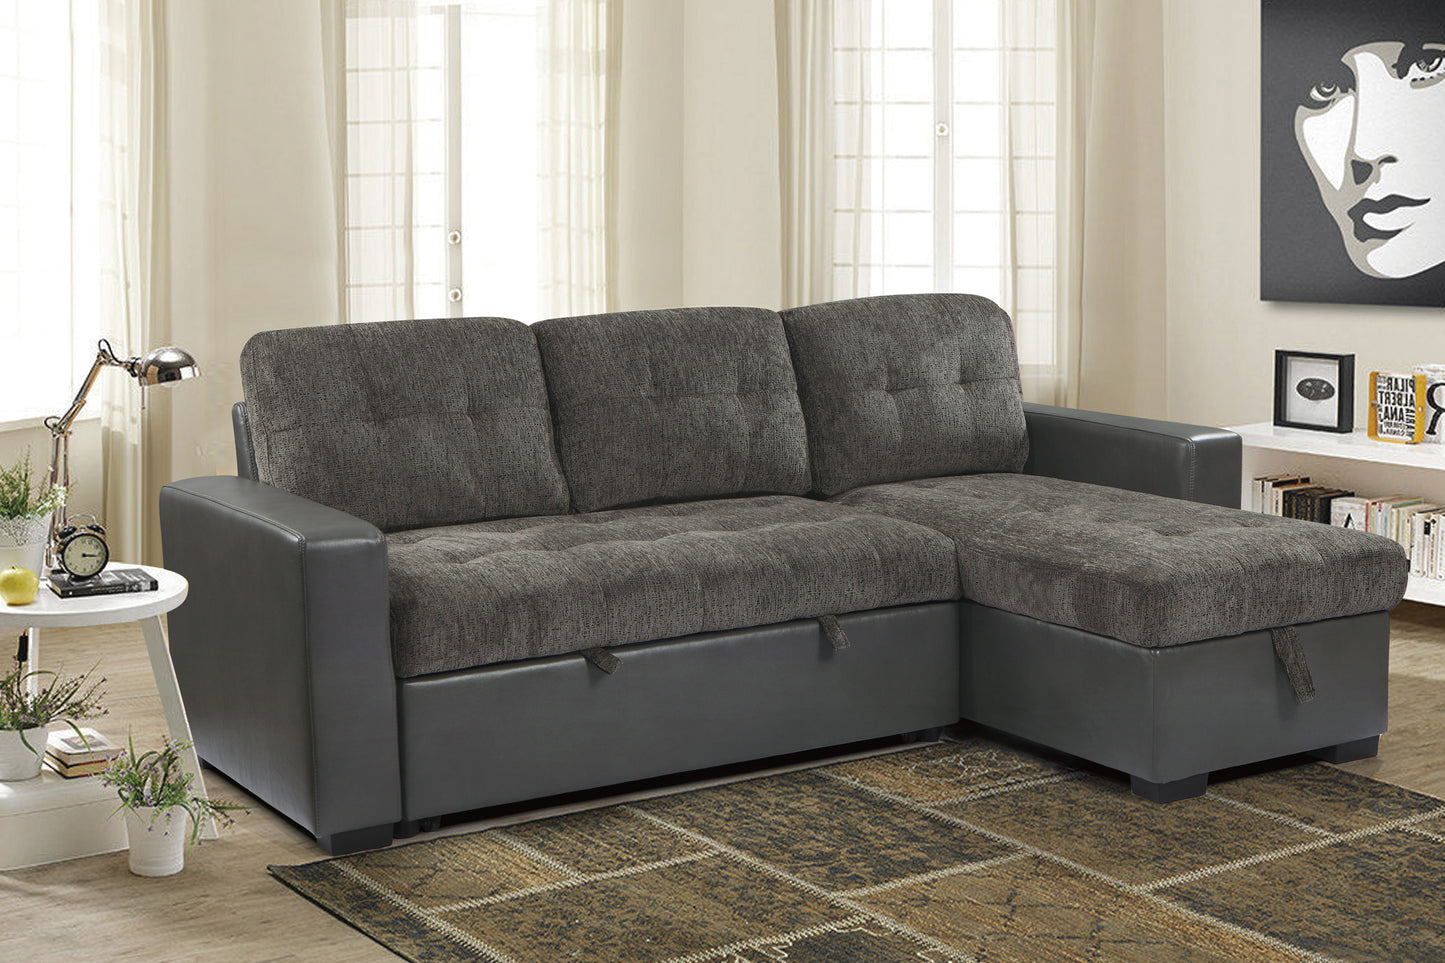 Swallowtail 2-Piece Reversible Sectional with Pull-out Bed and Hidden Storage